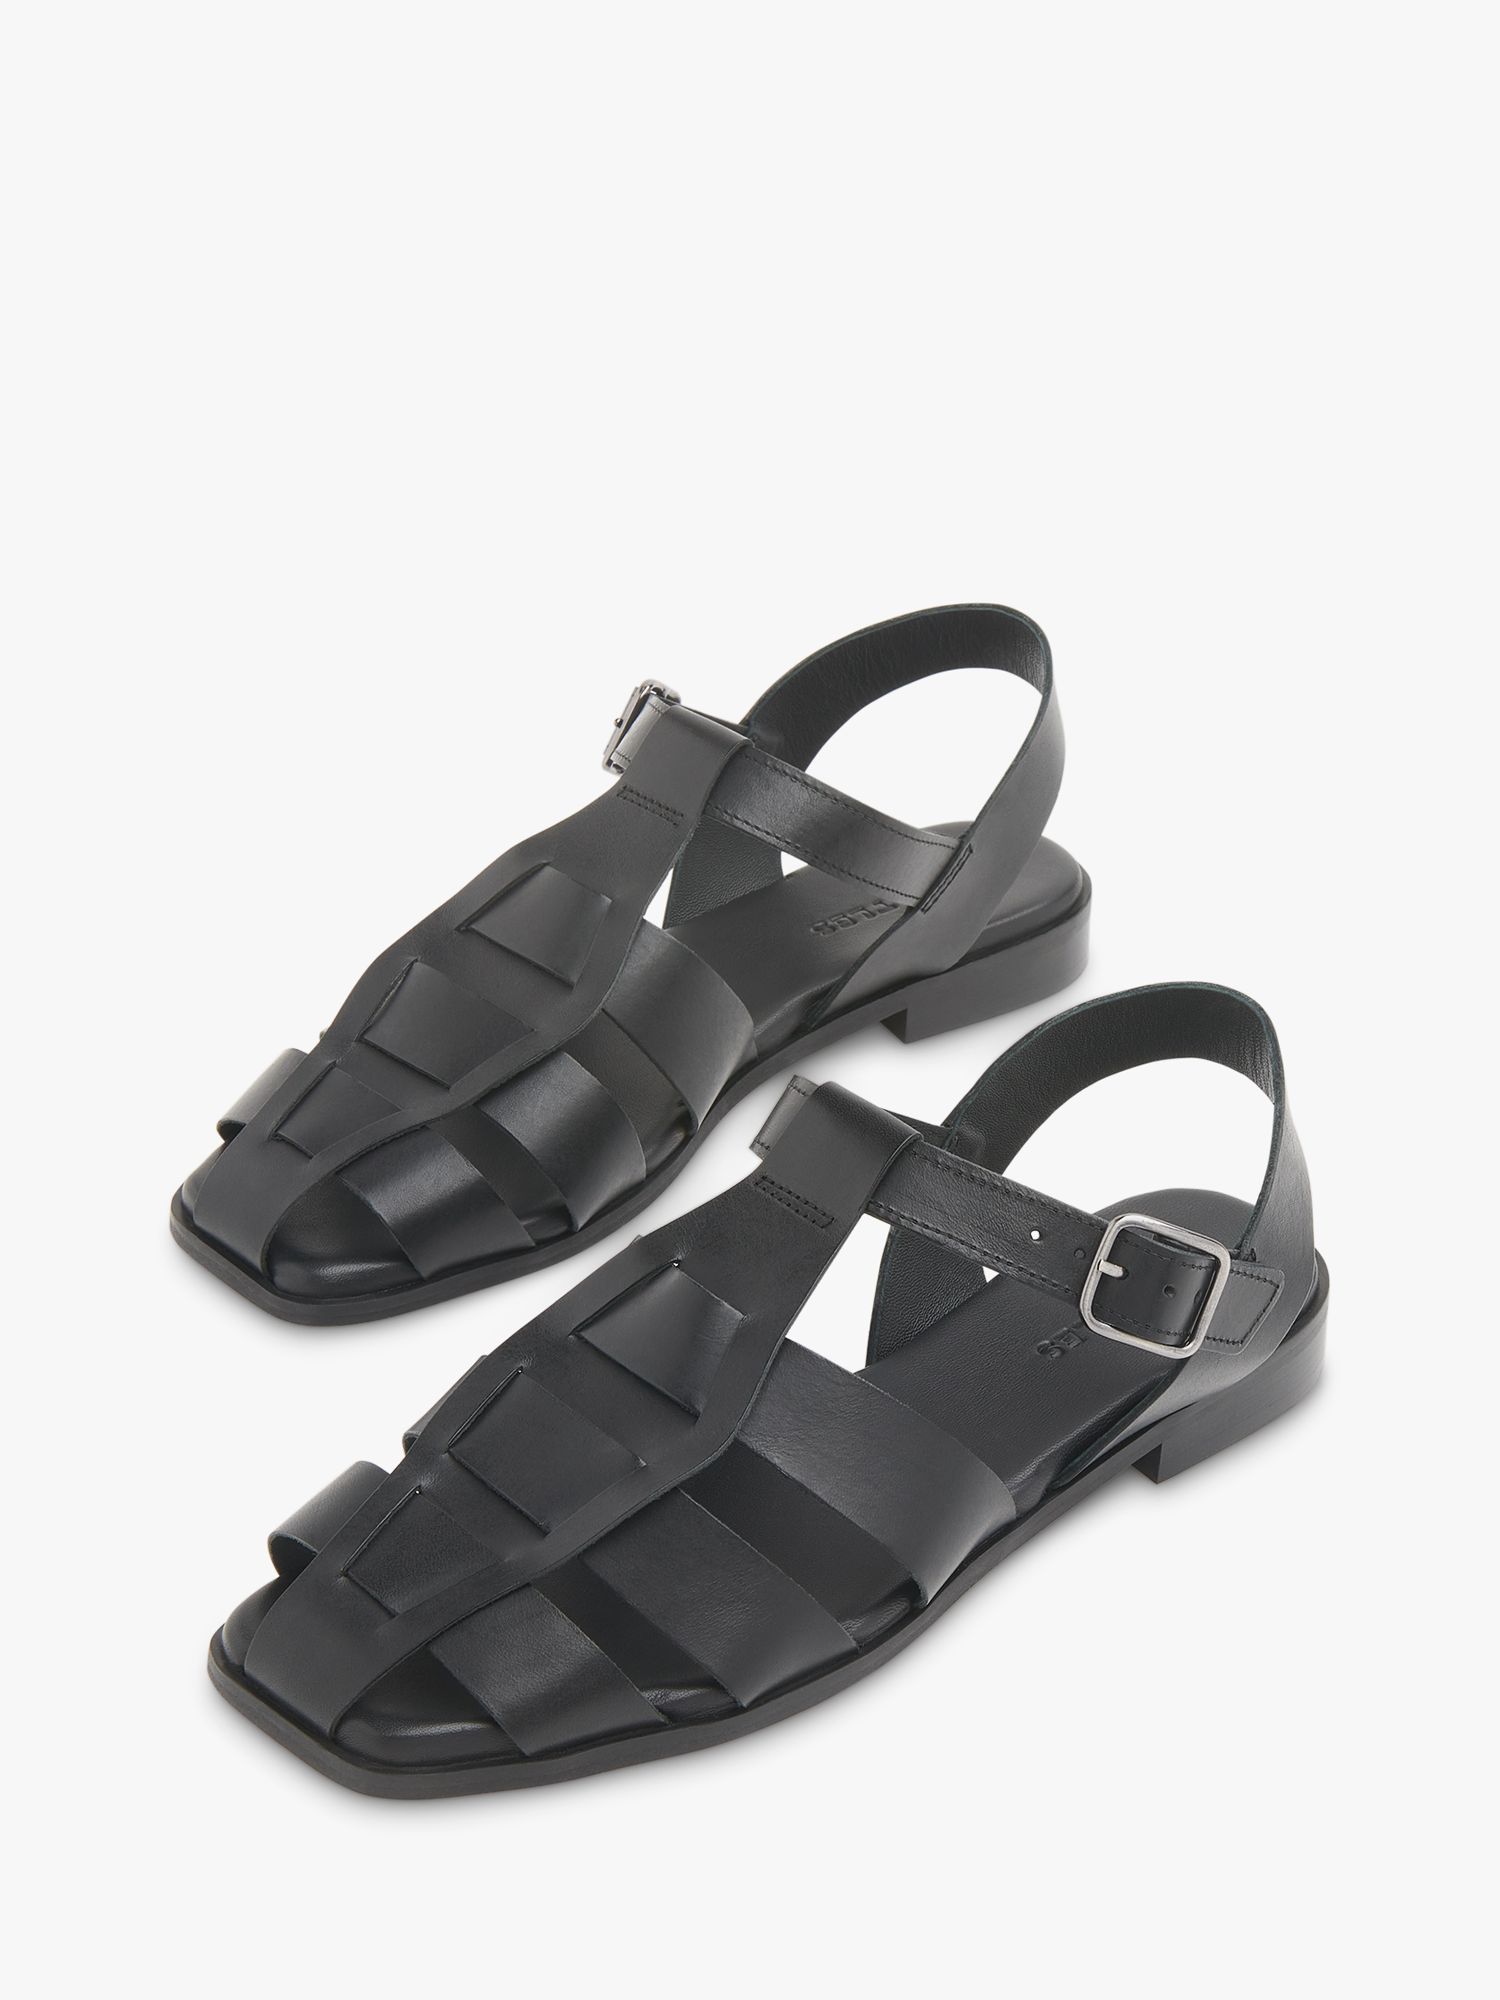 Whistles Roma Leather Caged Sandals, Black at John Lewis & Partners